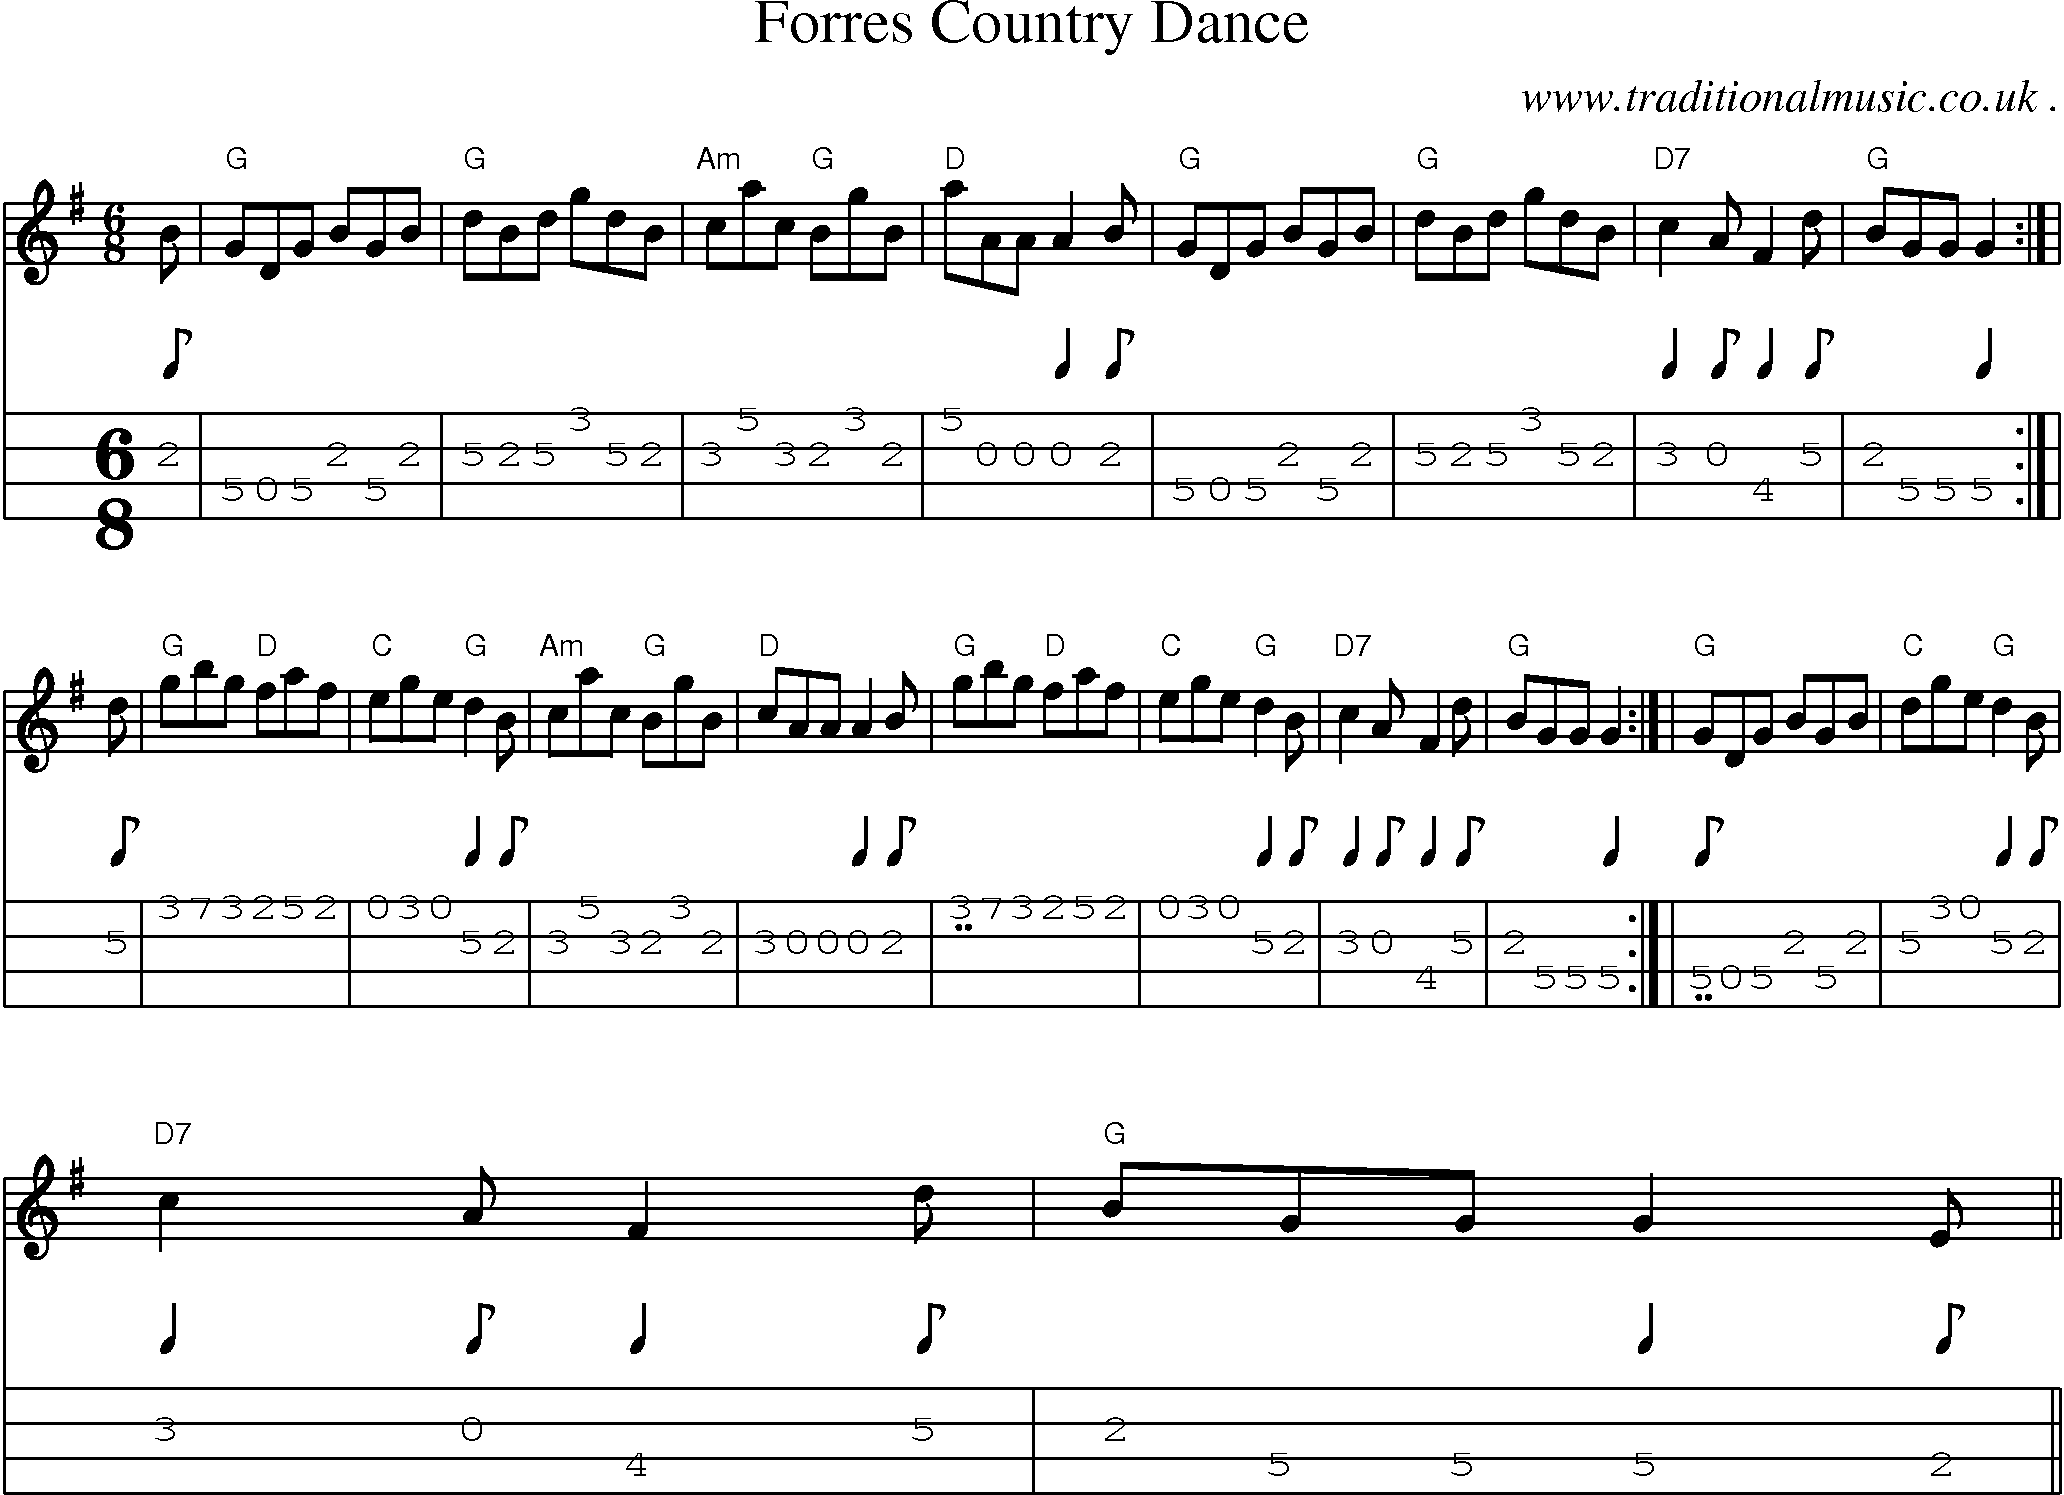 Sheet-music  score, Chords and Mandolin Tabs for Forres Country Dance